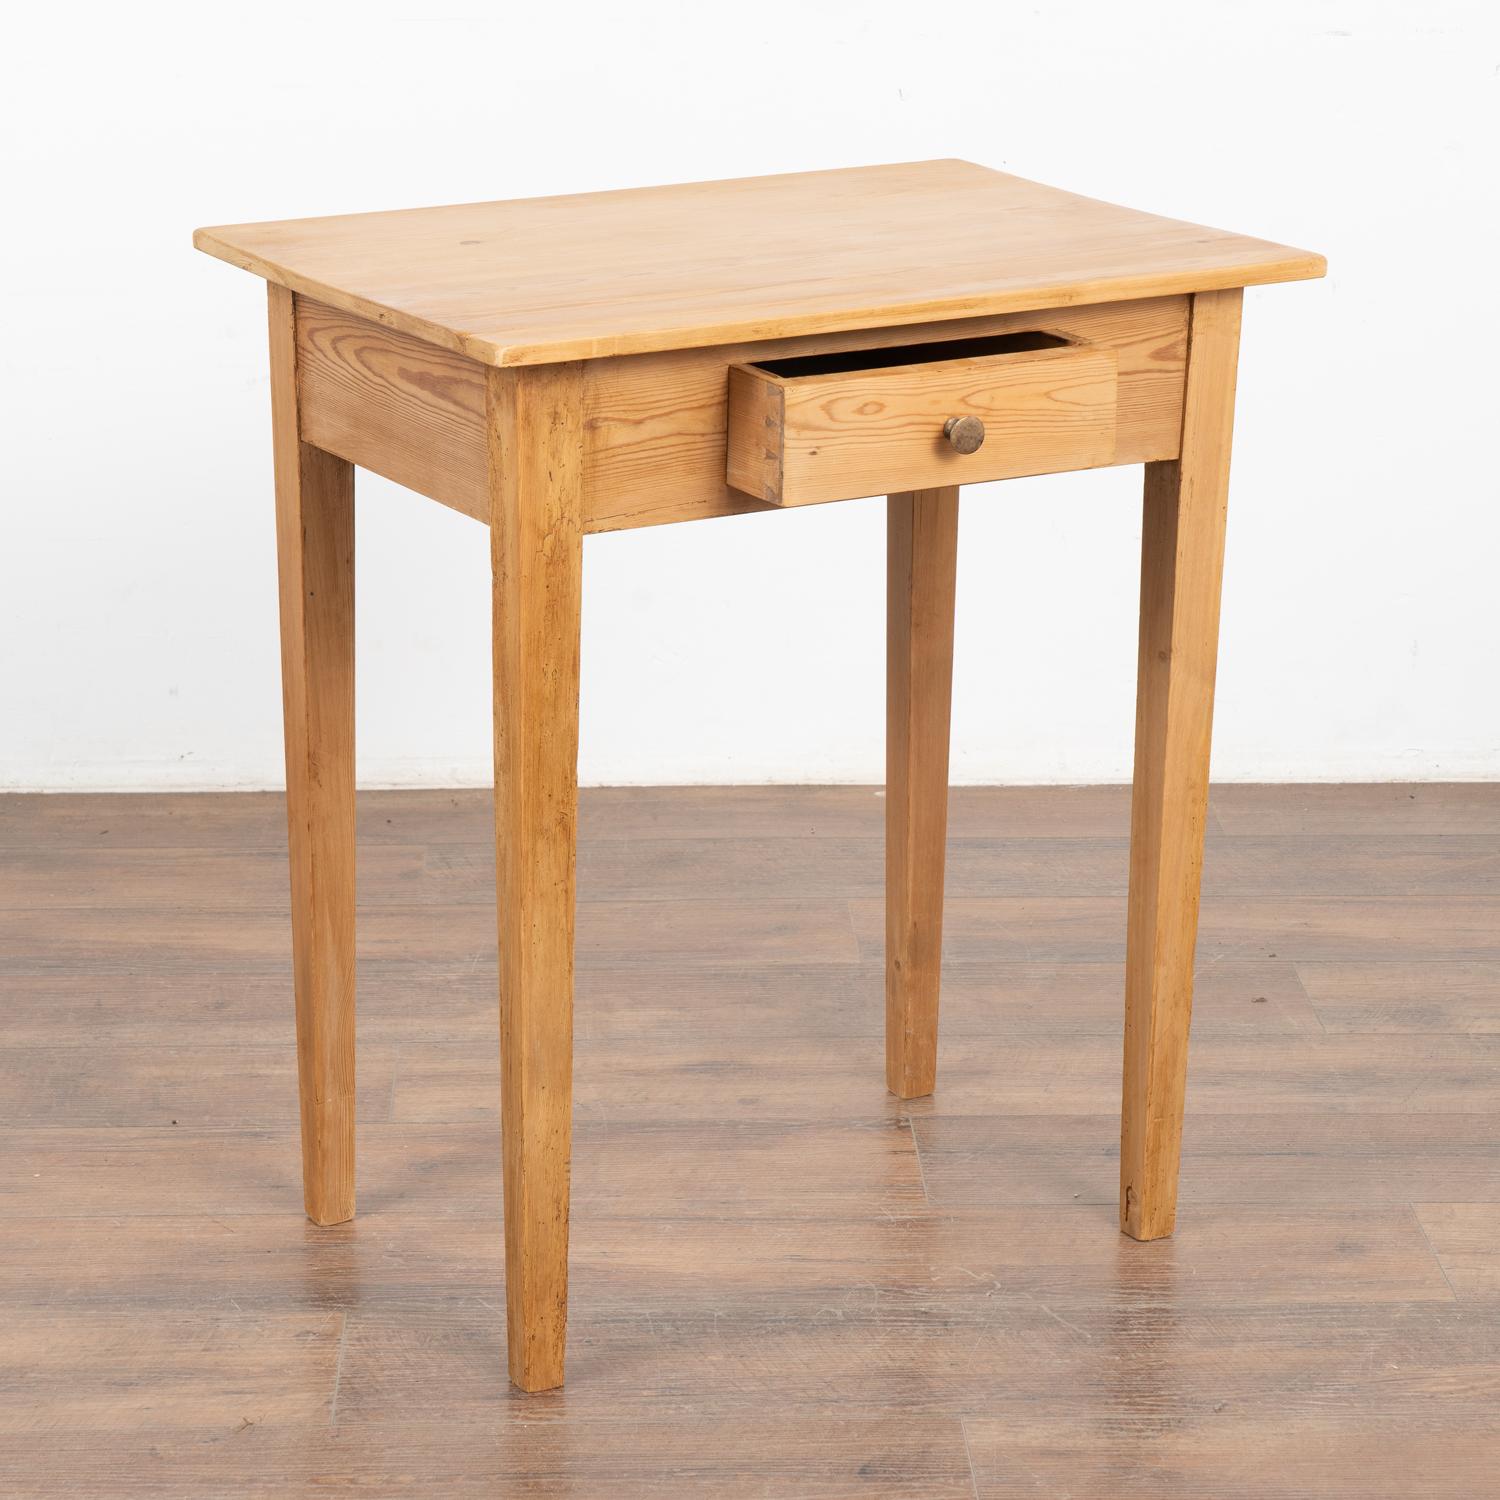 Country Small Pine Side Table With Tapered Legs, Denmark circa 1900's For Sale